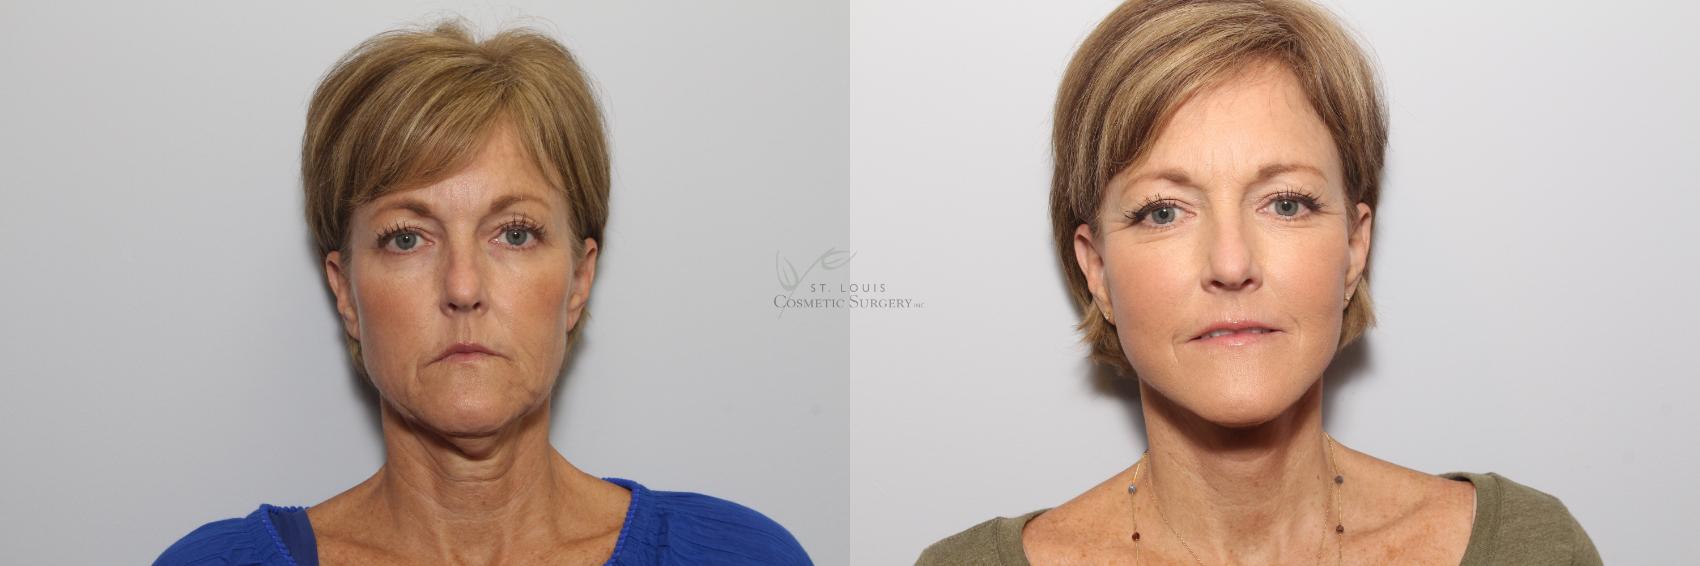 Neck Lift Before & After Photo | St. Louis, MO | St. Louis Cosmetic Surgery